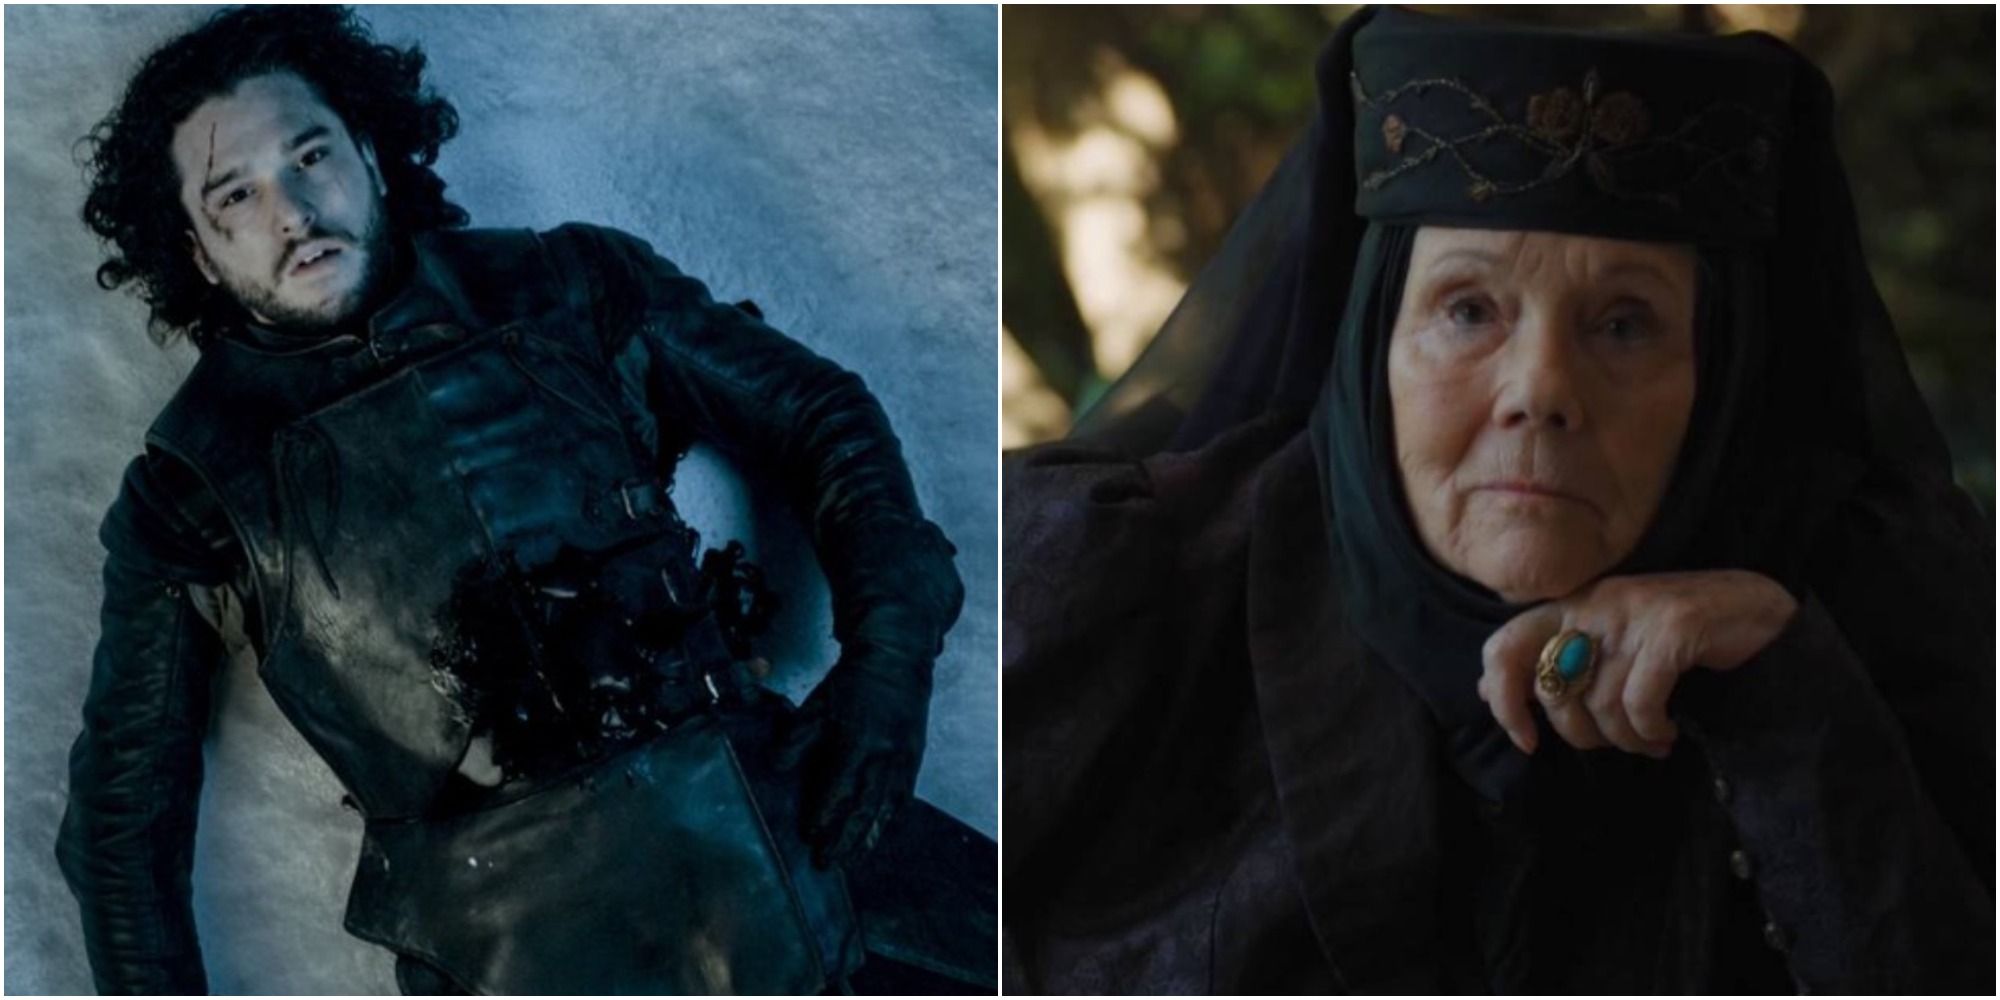 Jon Snow and Olenna Tyrell in Game of Thrones